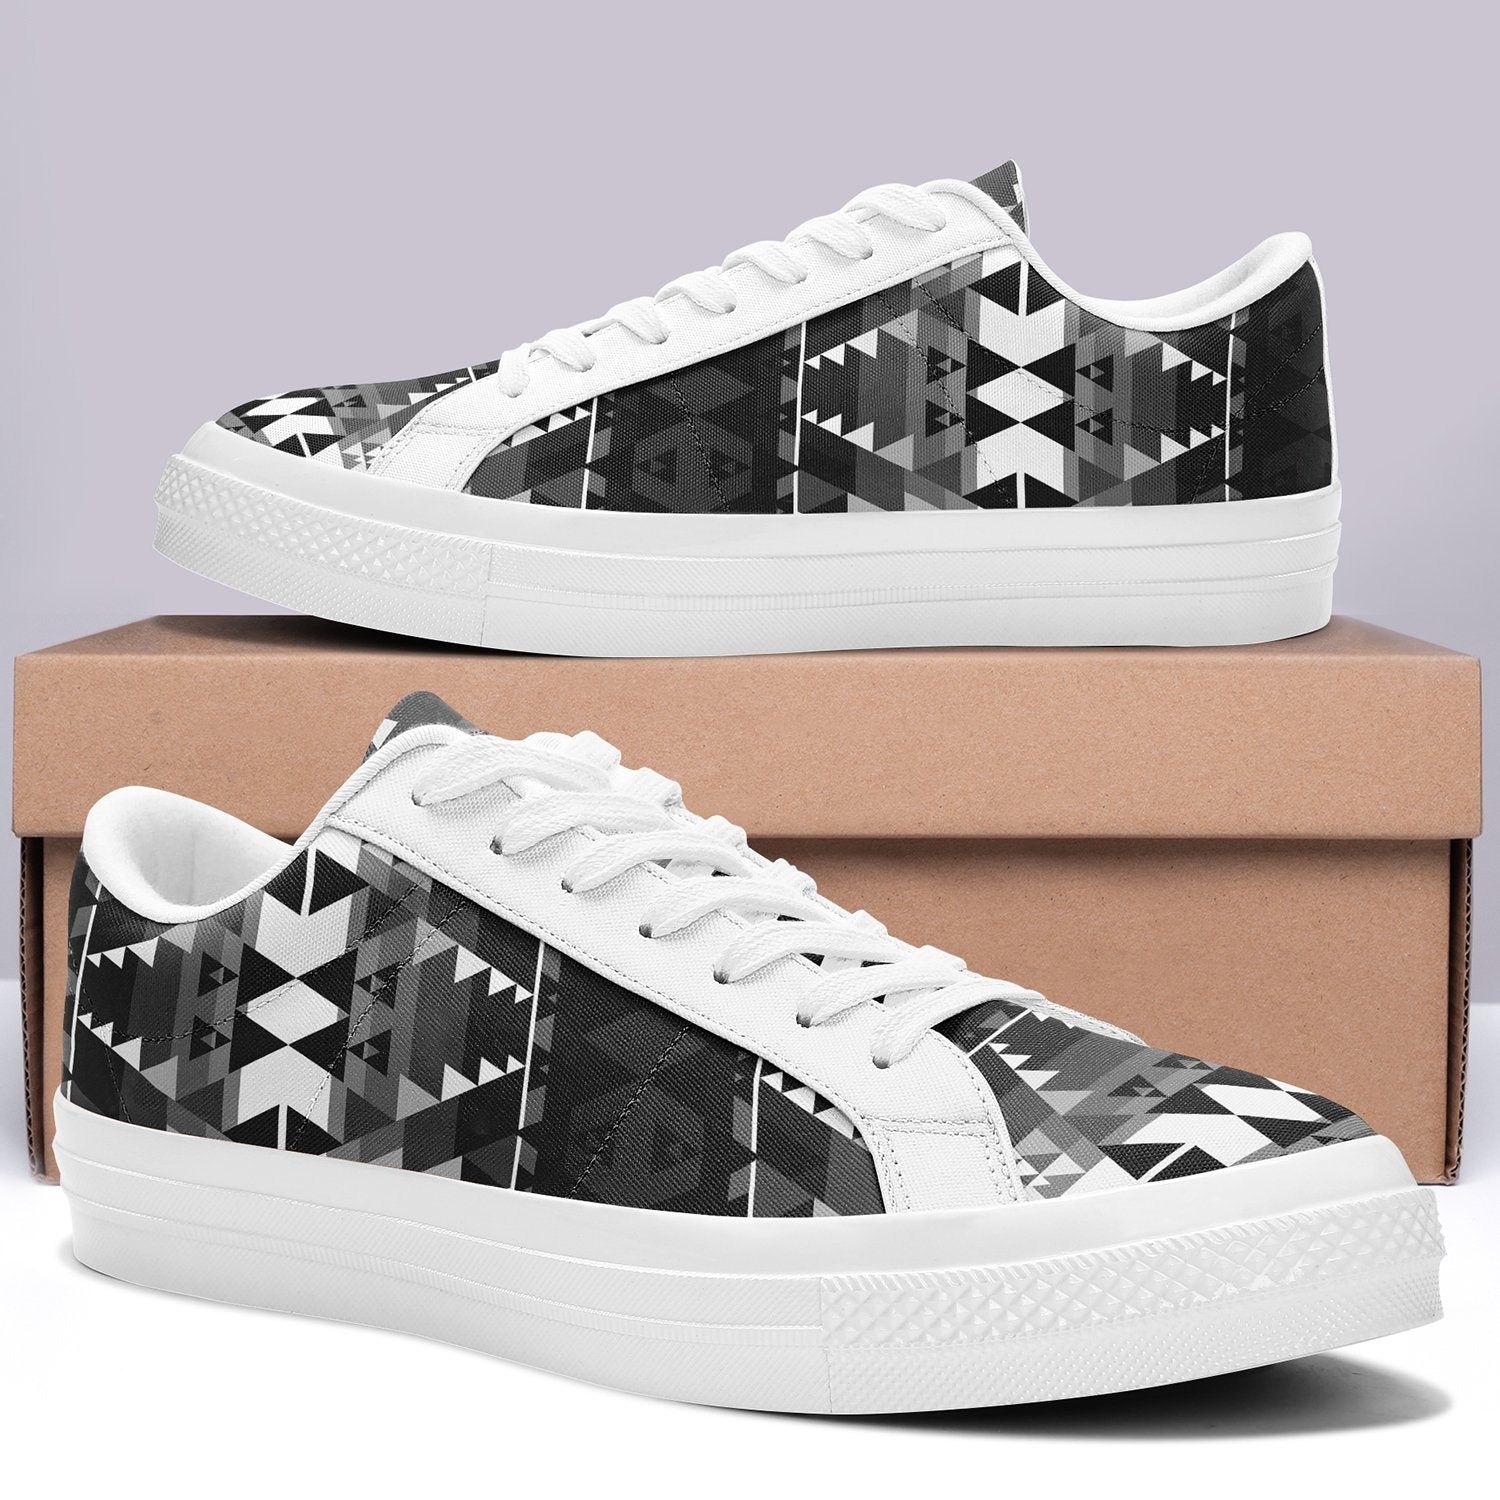 Writing on Stone Black and White Aapisi Low Top Canvas Shoes White Sole 49 Dzine 